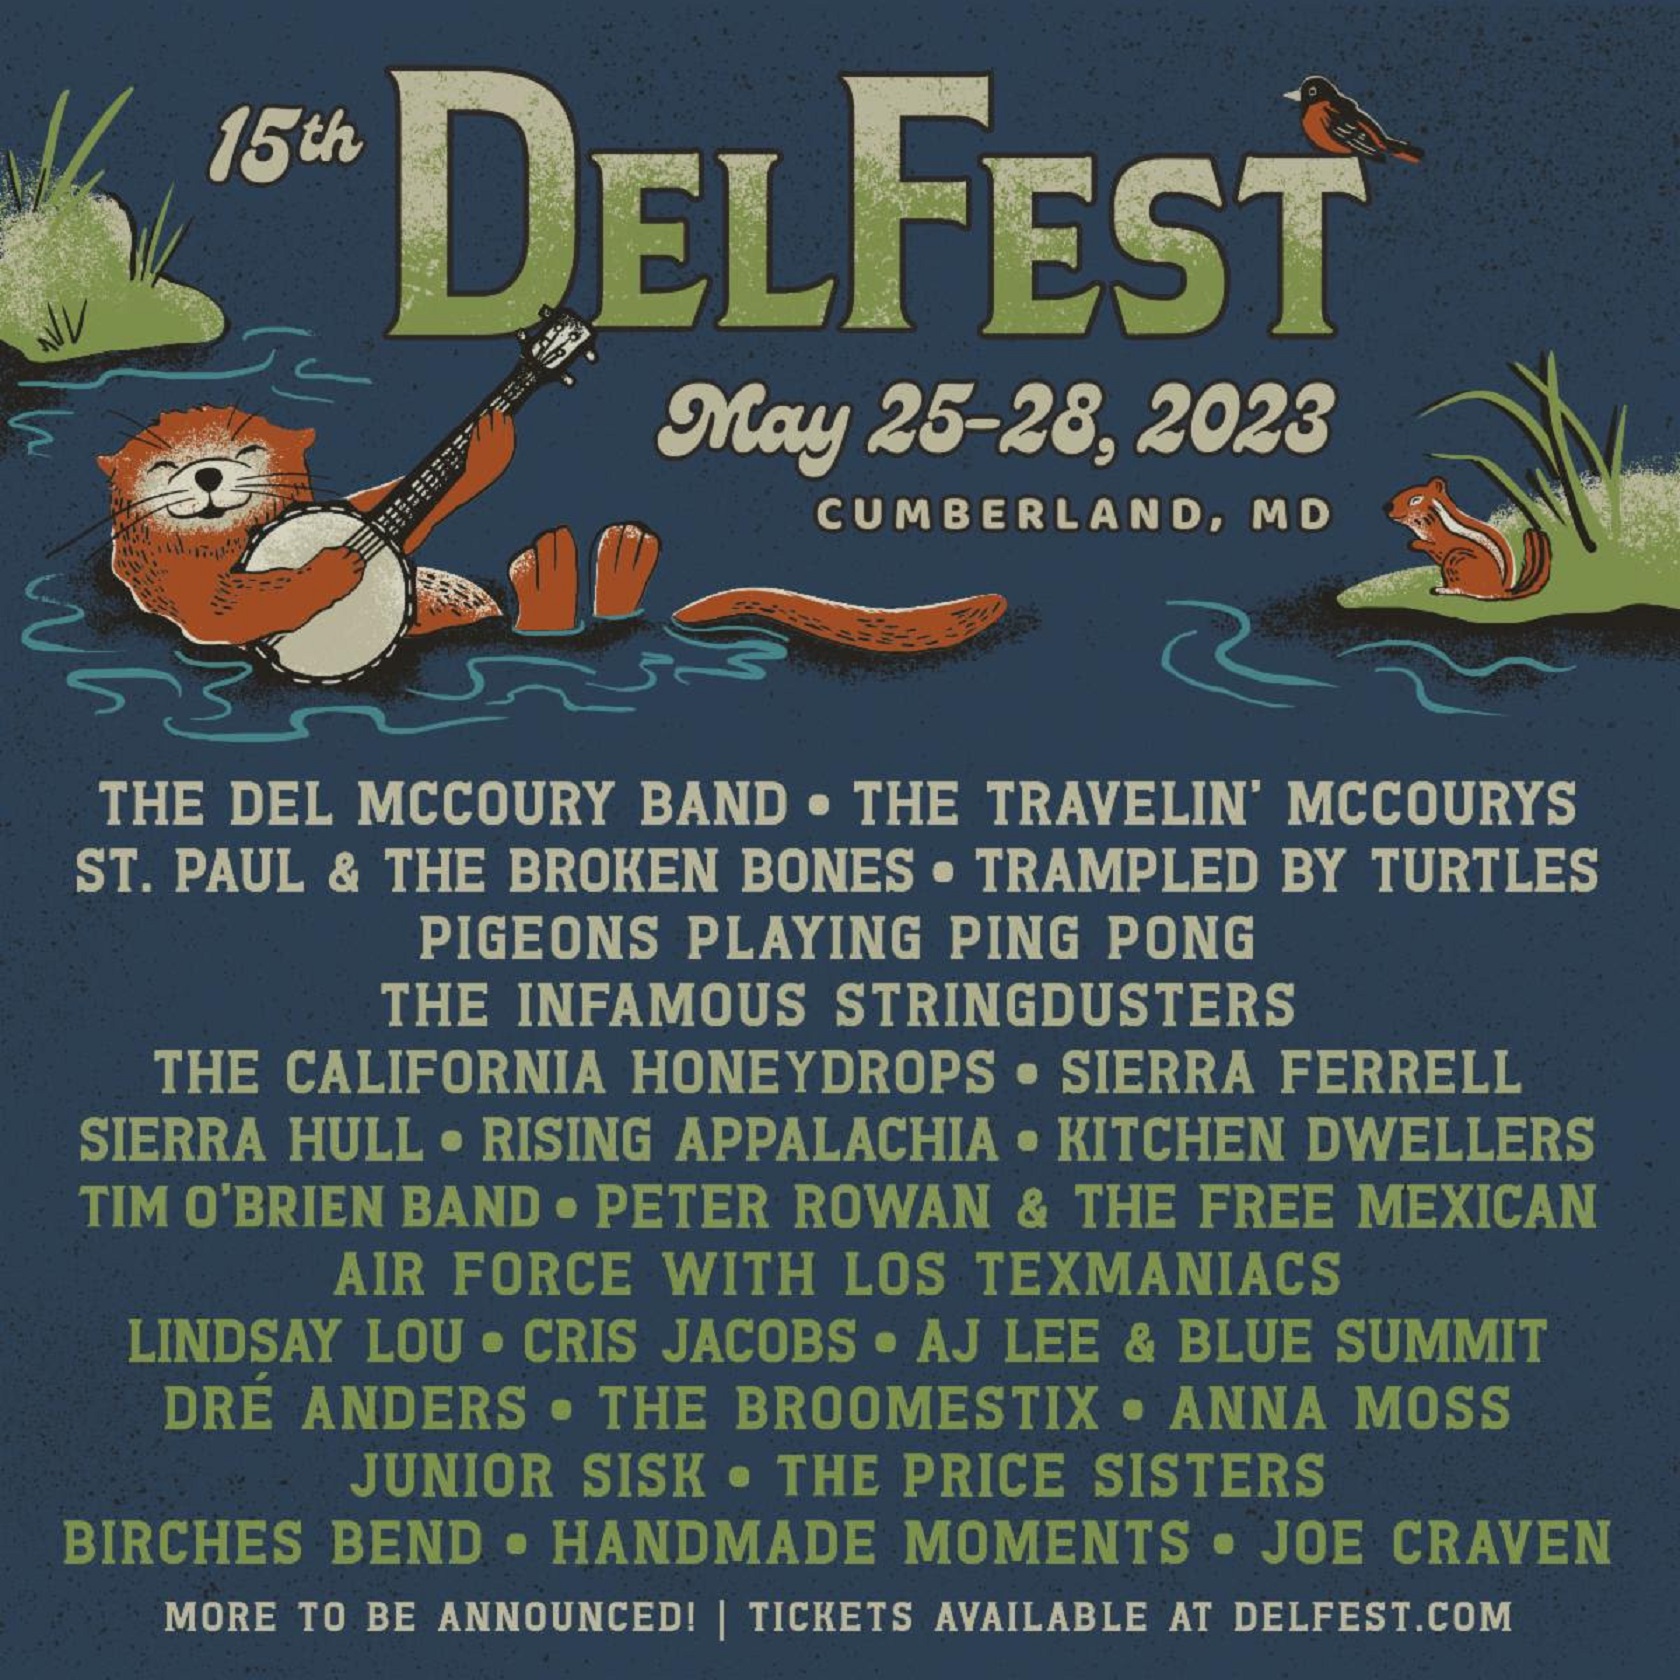 Infamous Stringdusters, Sierra Ferrell, Pigeons Playing Ping Pong And More Top DelFest 2023 Lineup Alongside Festival Hosts The Del McCoury Band And The Travelin’ McCourys